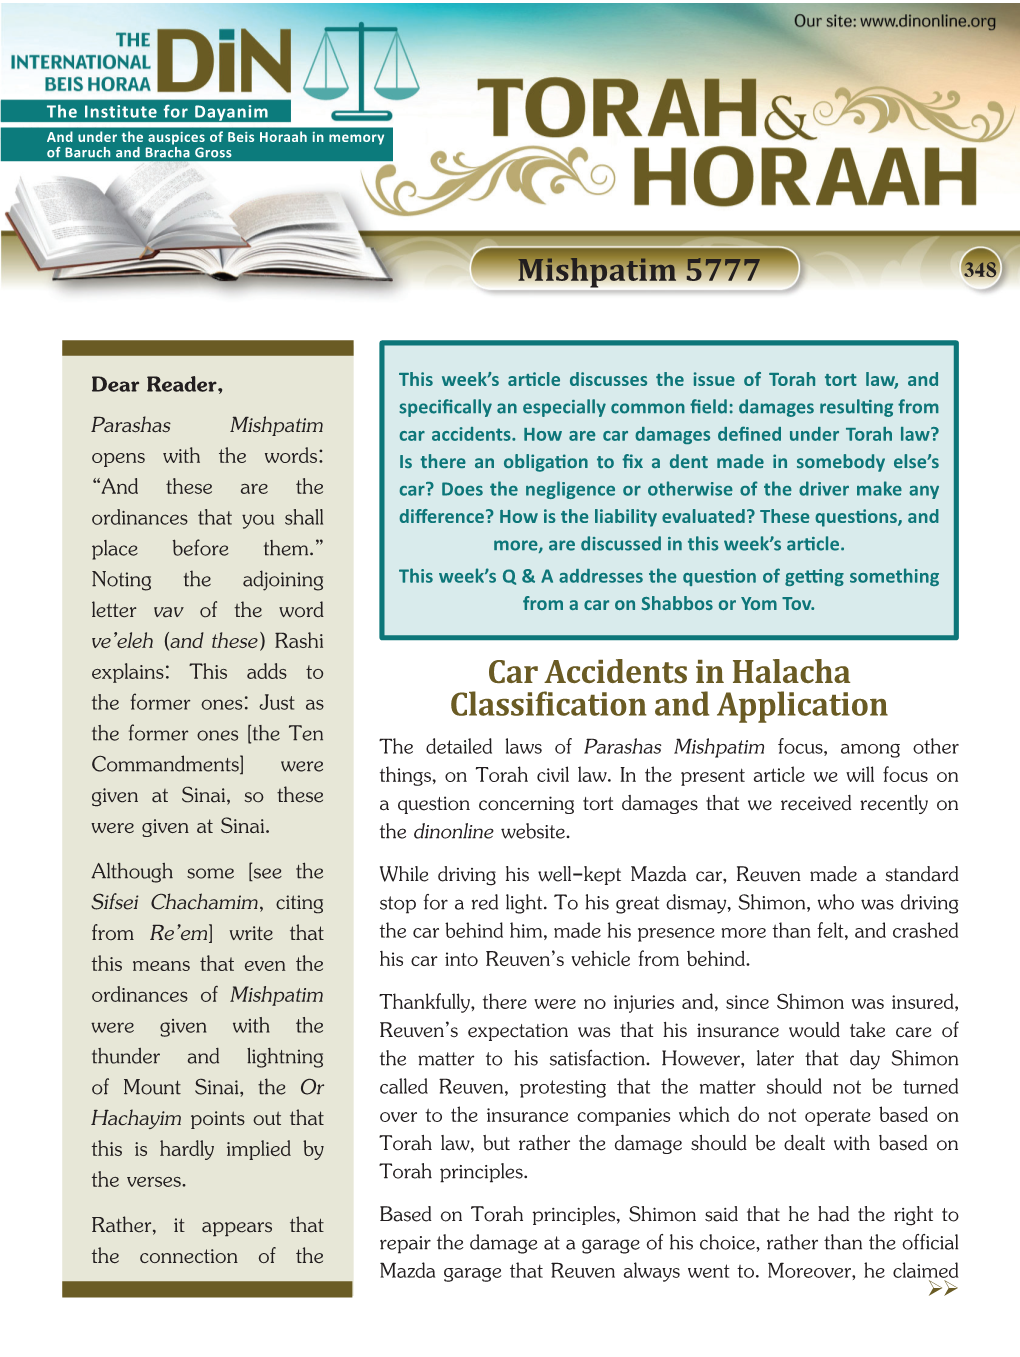 Car Accidents in Halacha Classification and Application